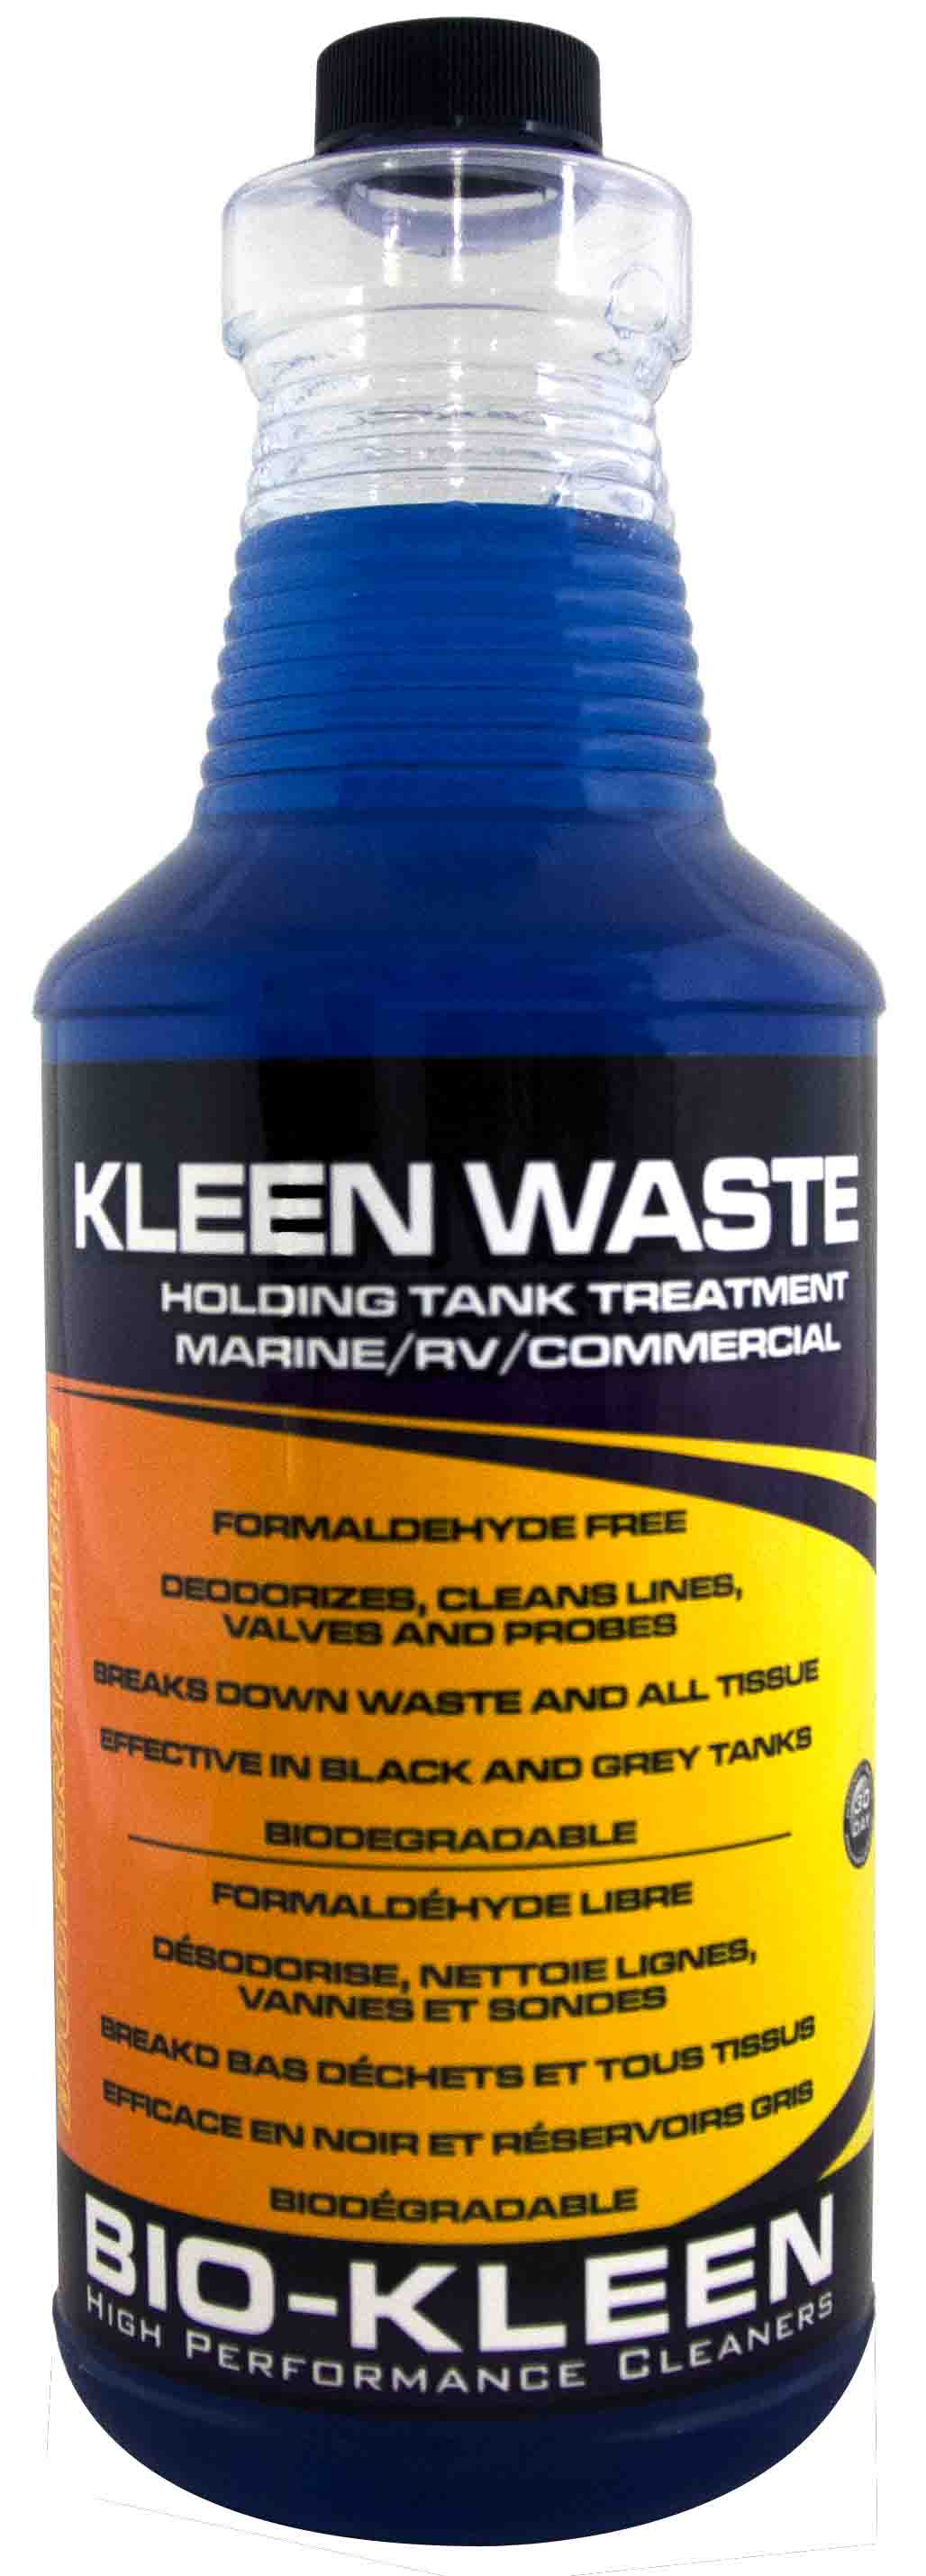 https://www.biokleen.com/resize/Shared/Images/Product/Kleen-Waste-Holding-Tank-Treatment/M01707-Kleen-Waste-32oz-Image.jpg?bw=1000&w=1000&bh=1000&h=1000